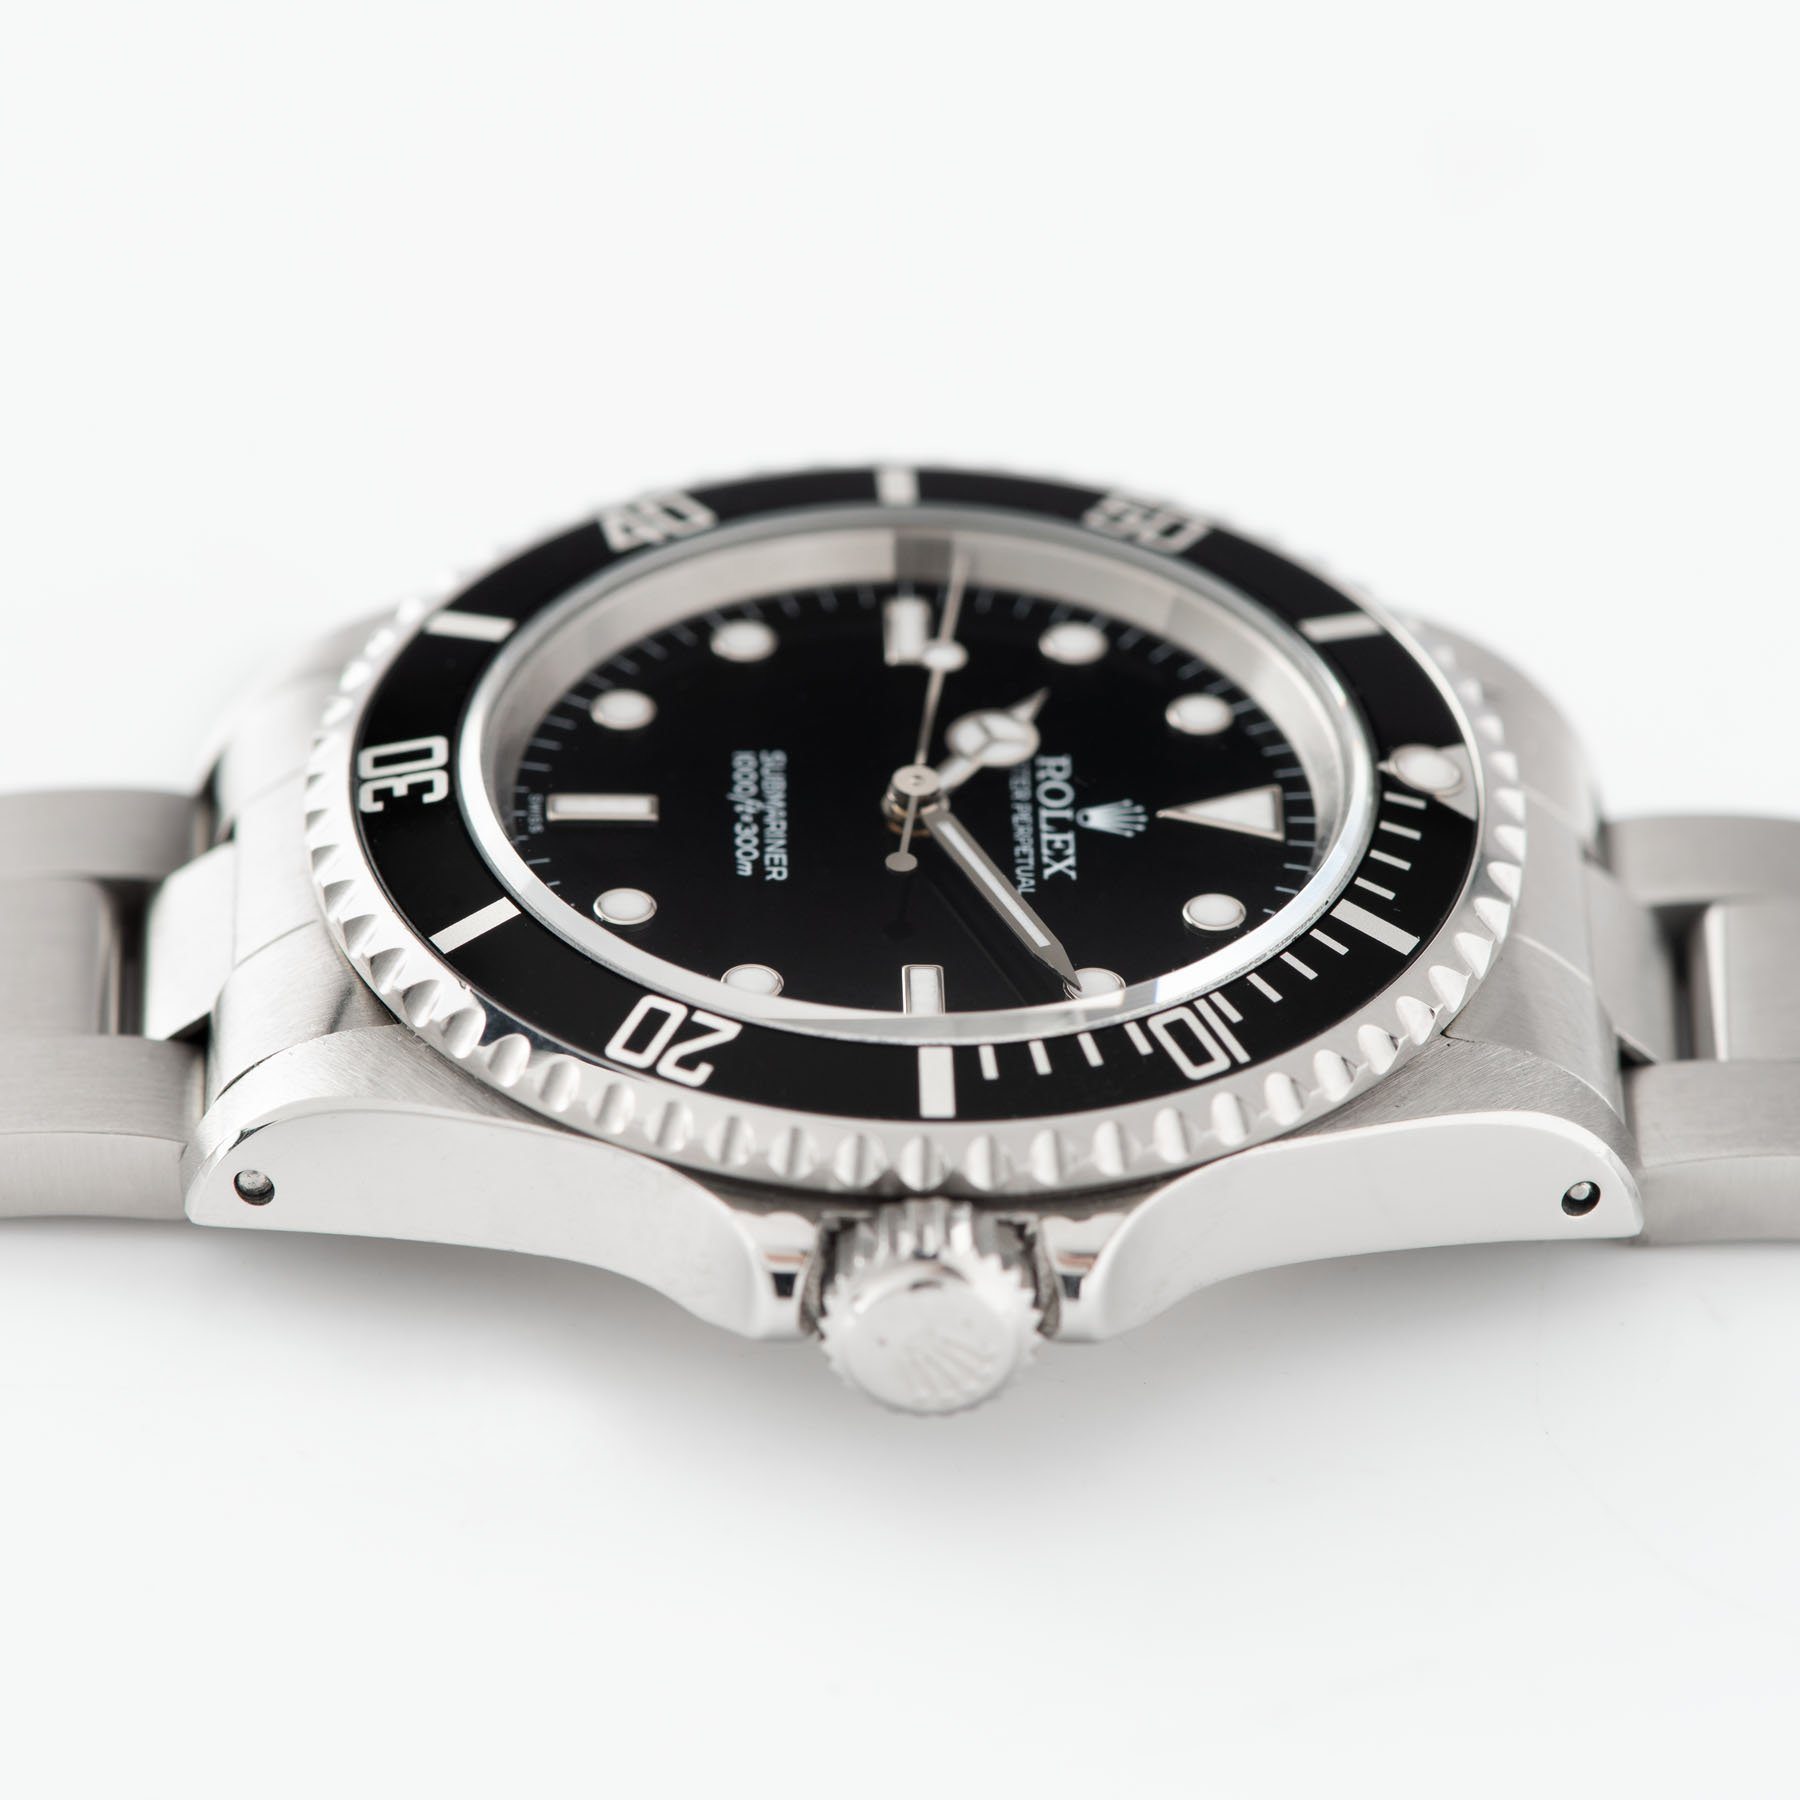 Rolex Submariner Swiss Only Dial Reference 14060